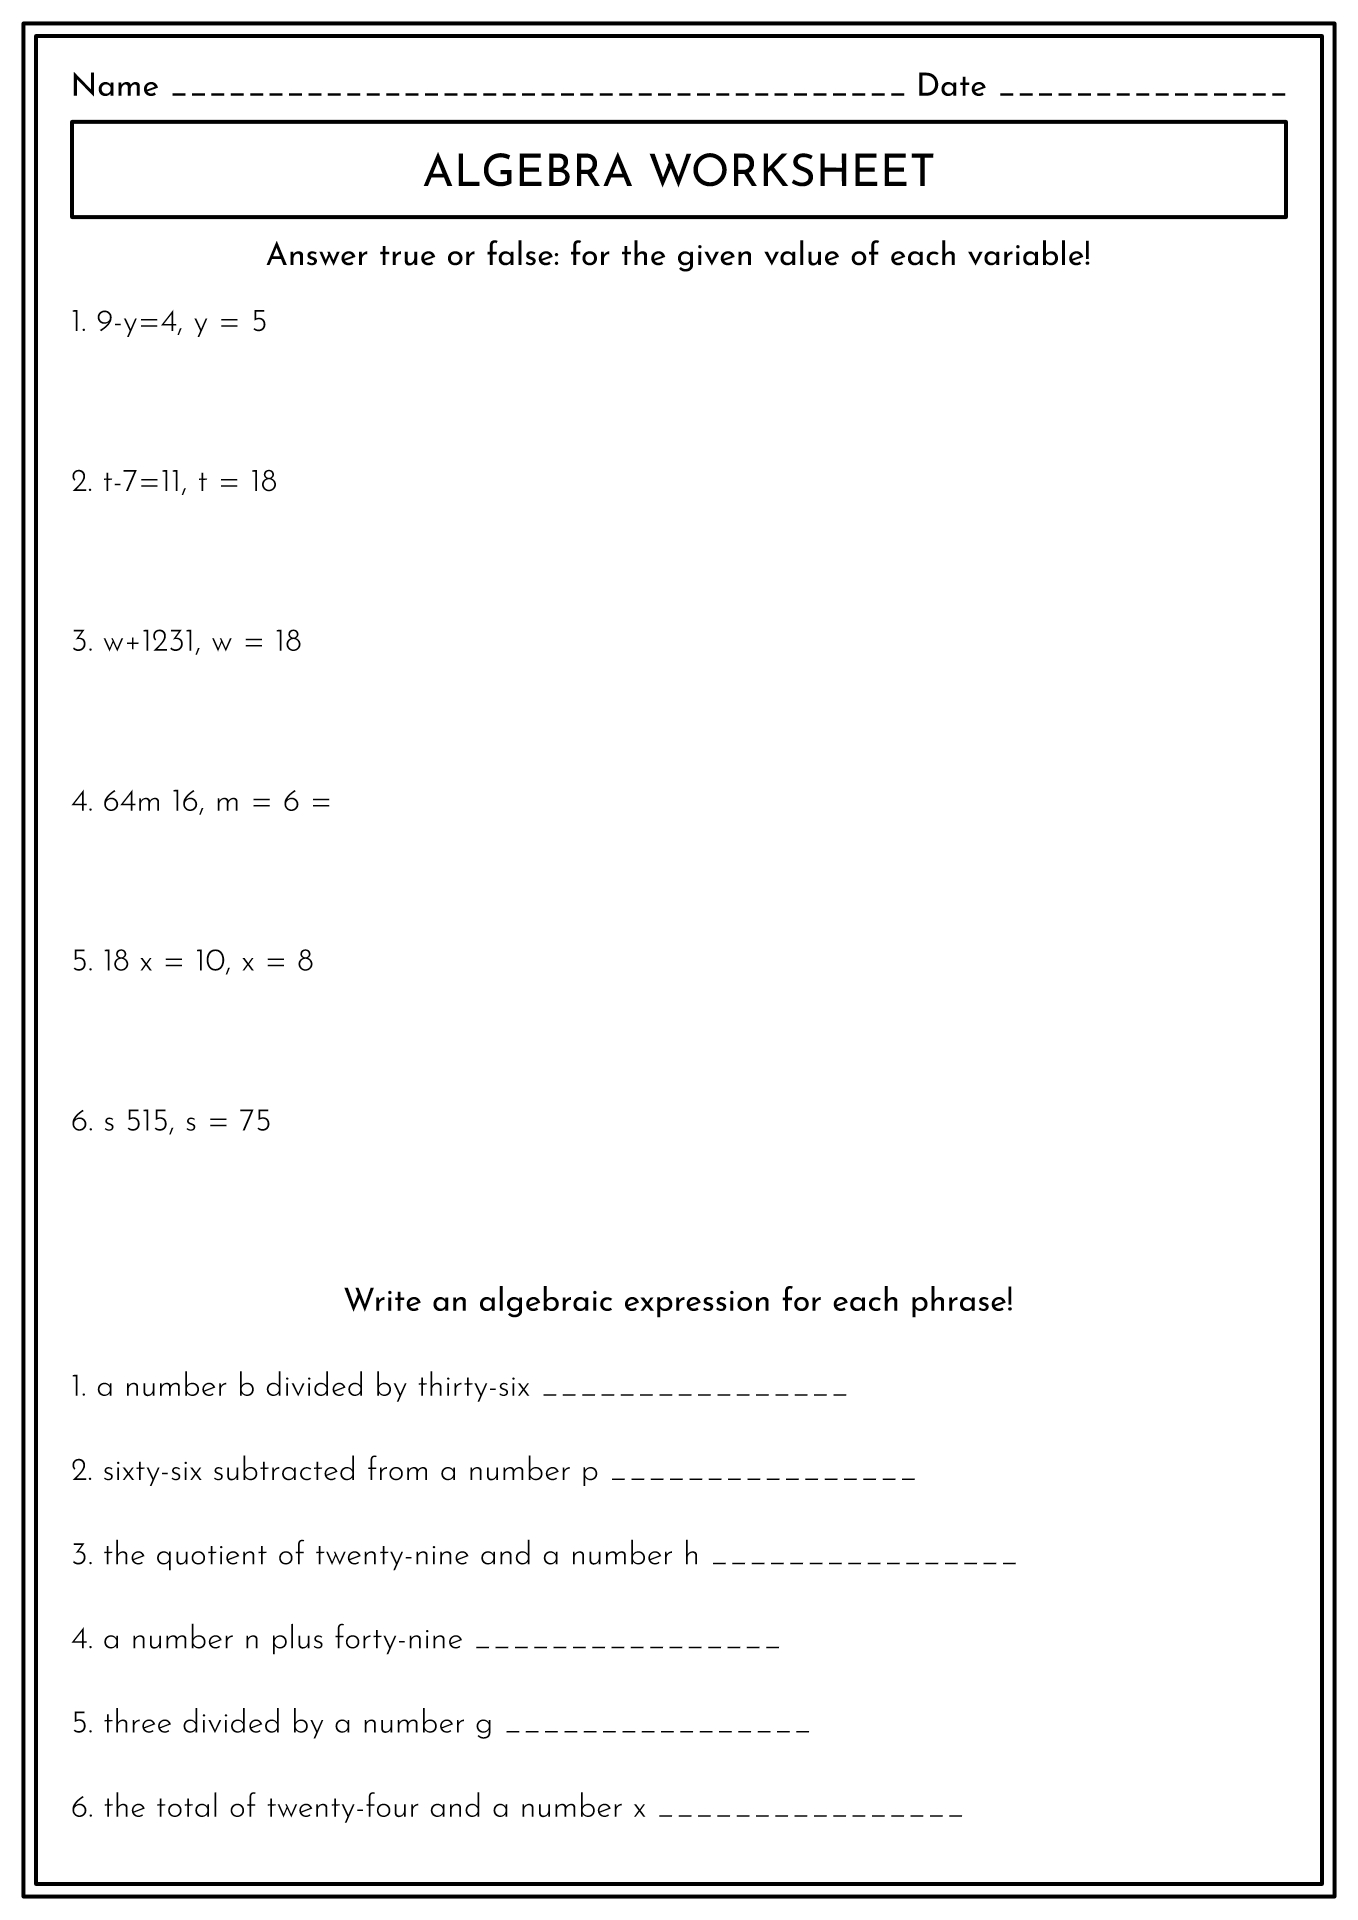 13 Best Images of College Trigonometry Worksheets - Pre ...